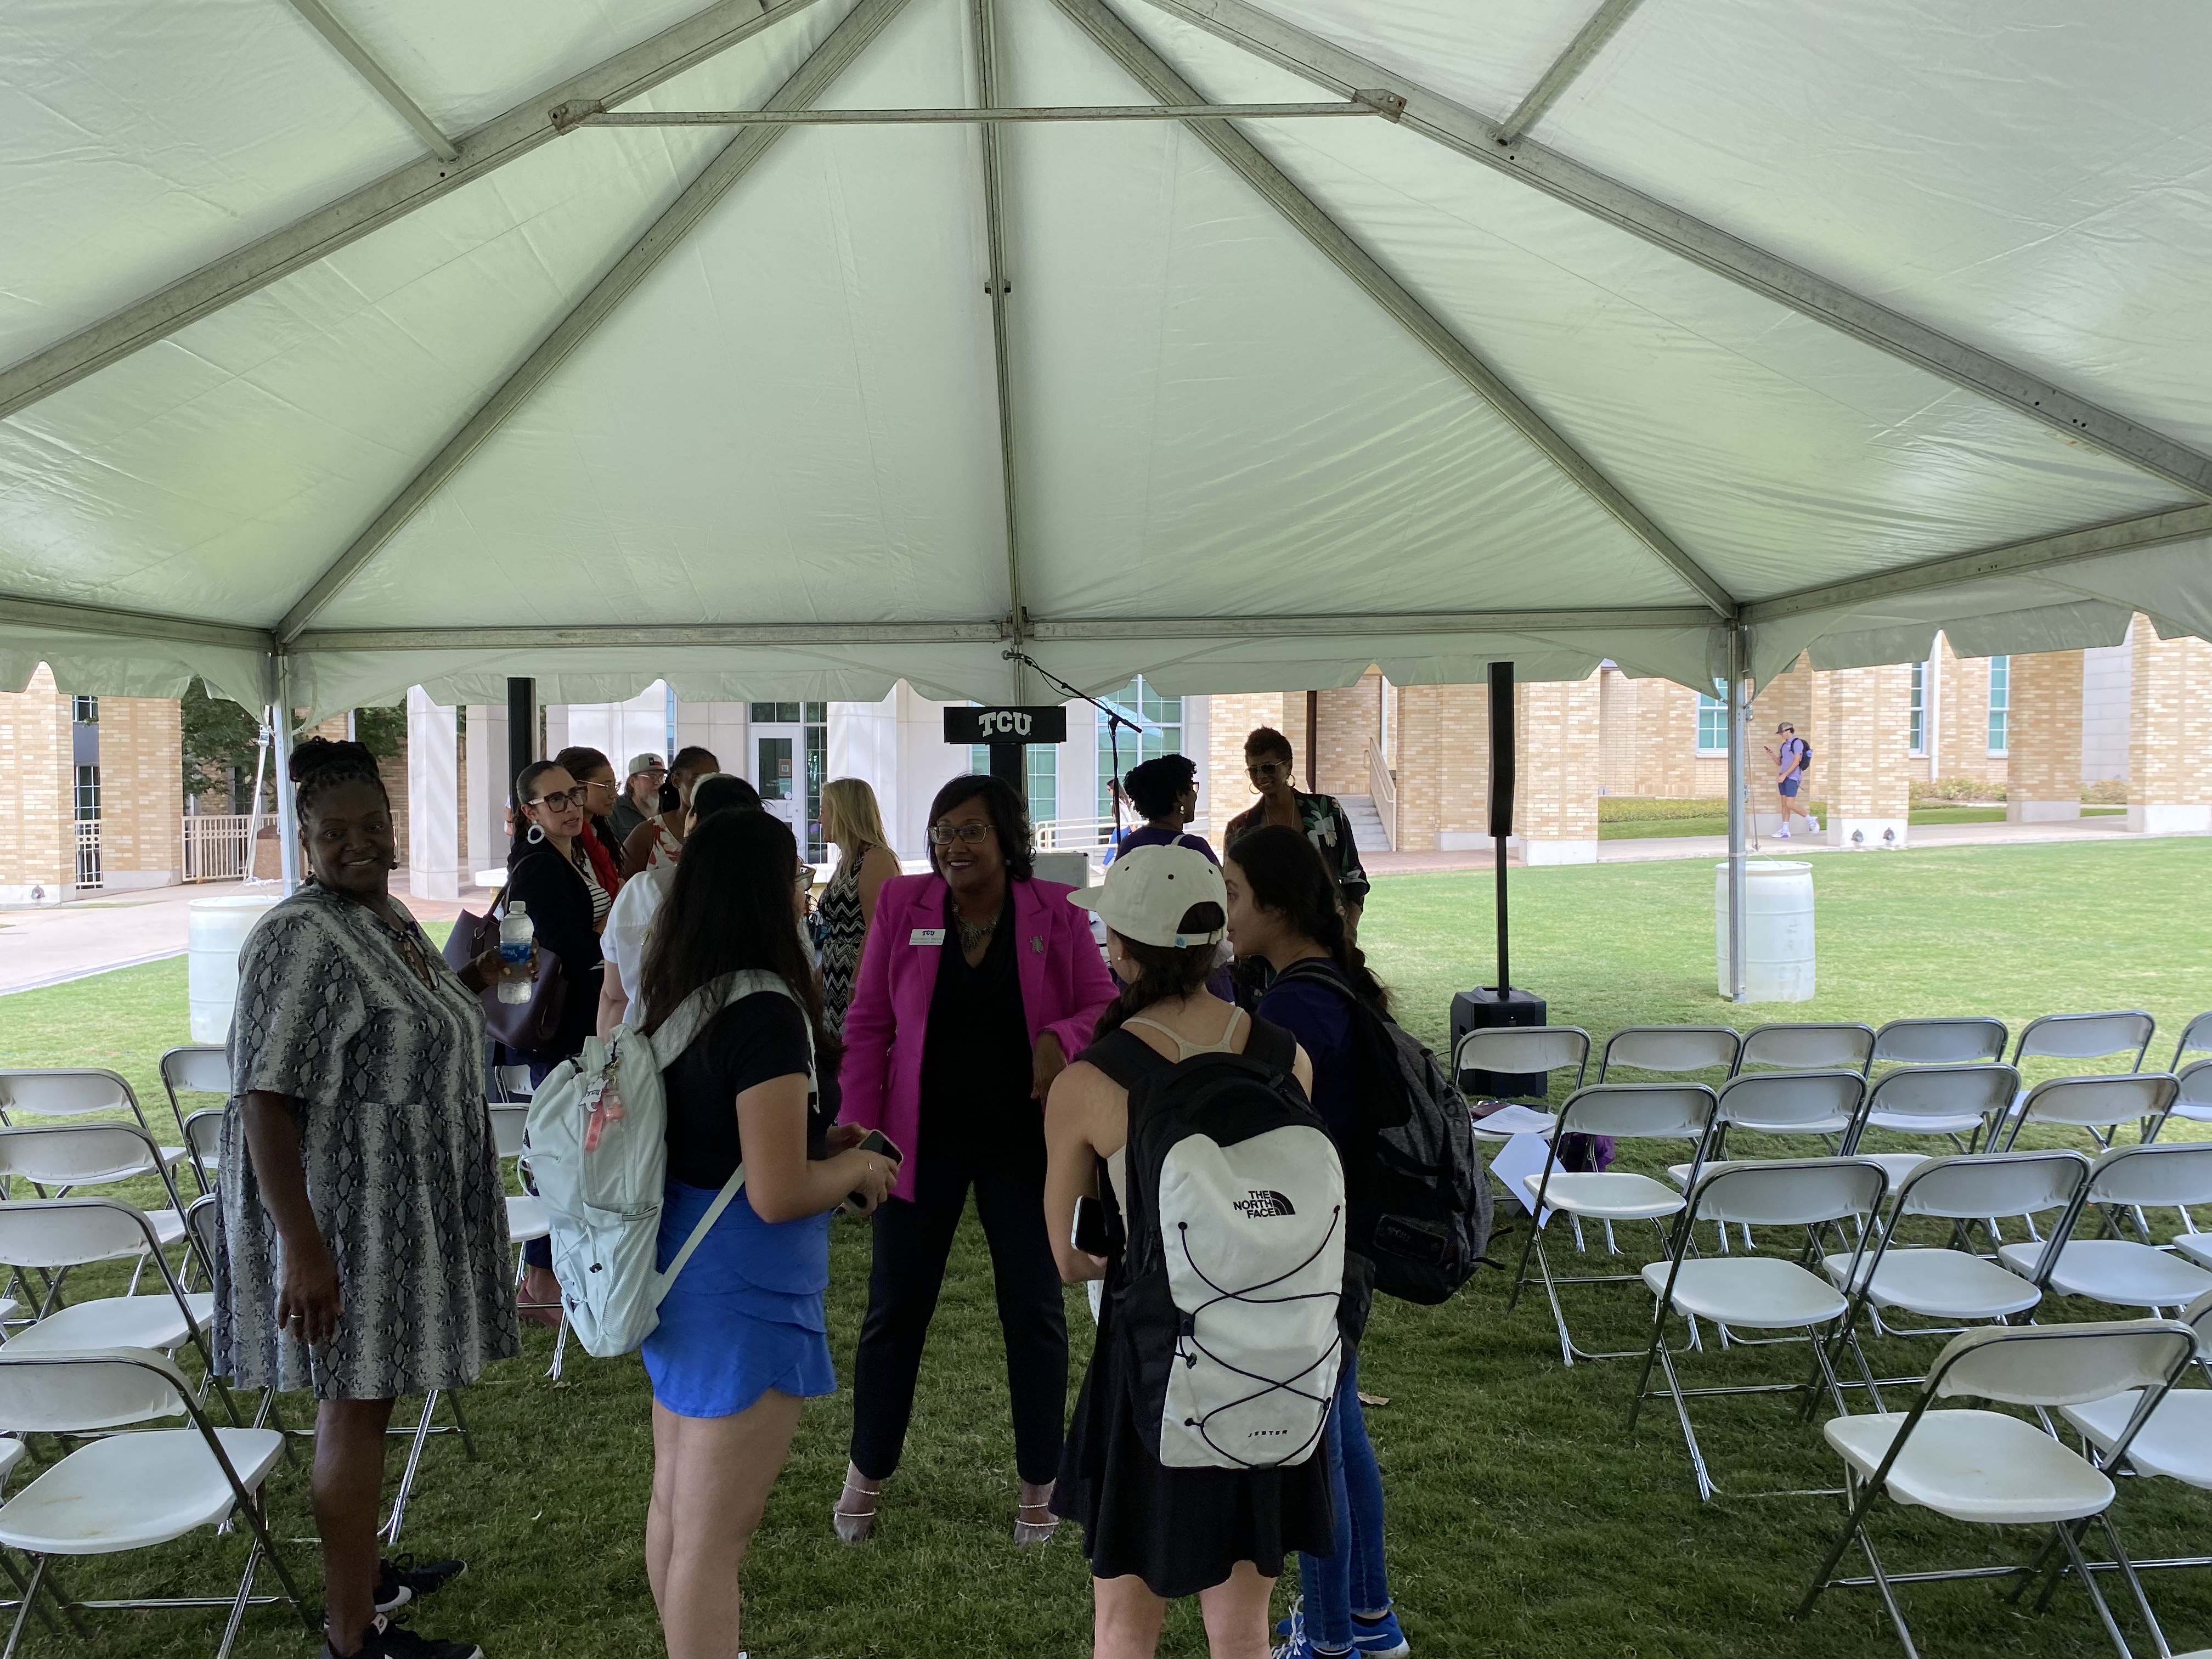 People gathered under tent in community commons.